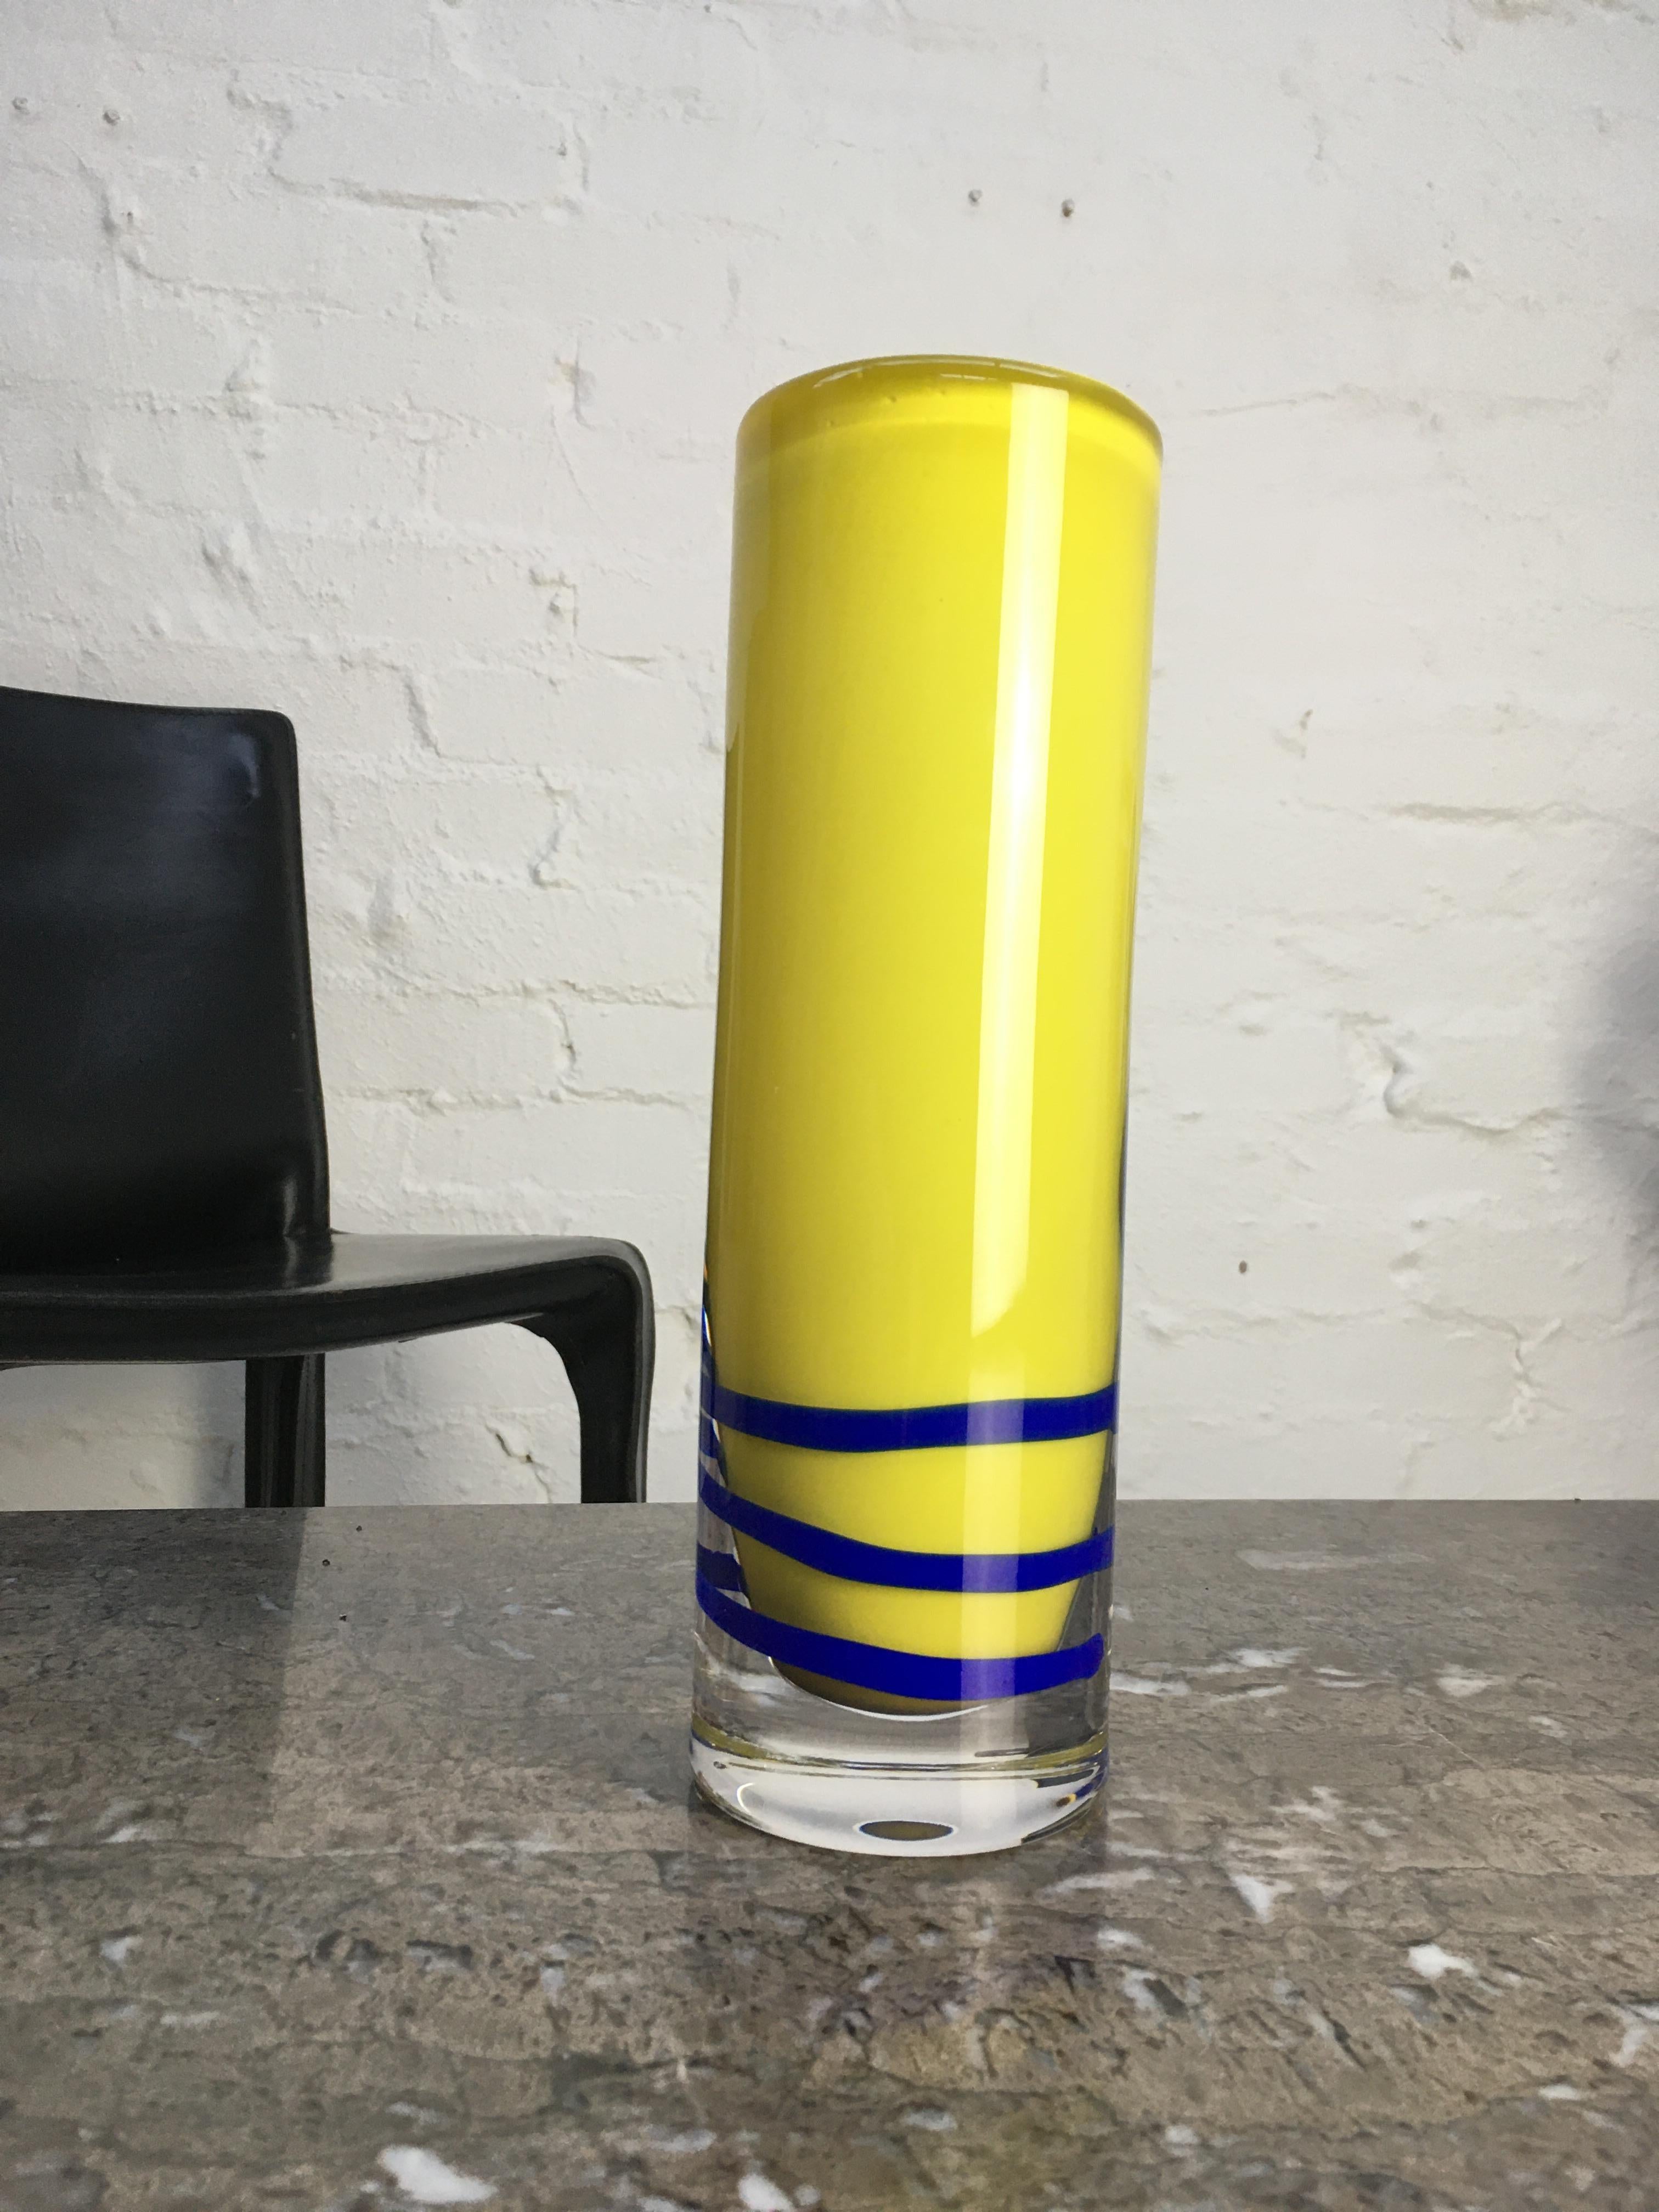 Art Glass Olle Alberius Orrefors Exhibition Vase Signed Numbered 1973 Acid Yellow Cobalt For Sale